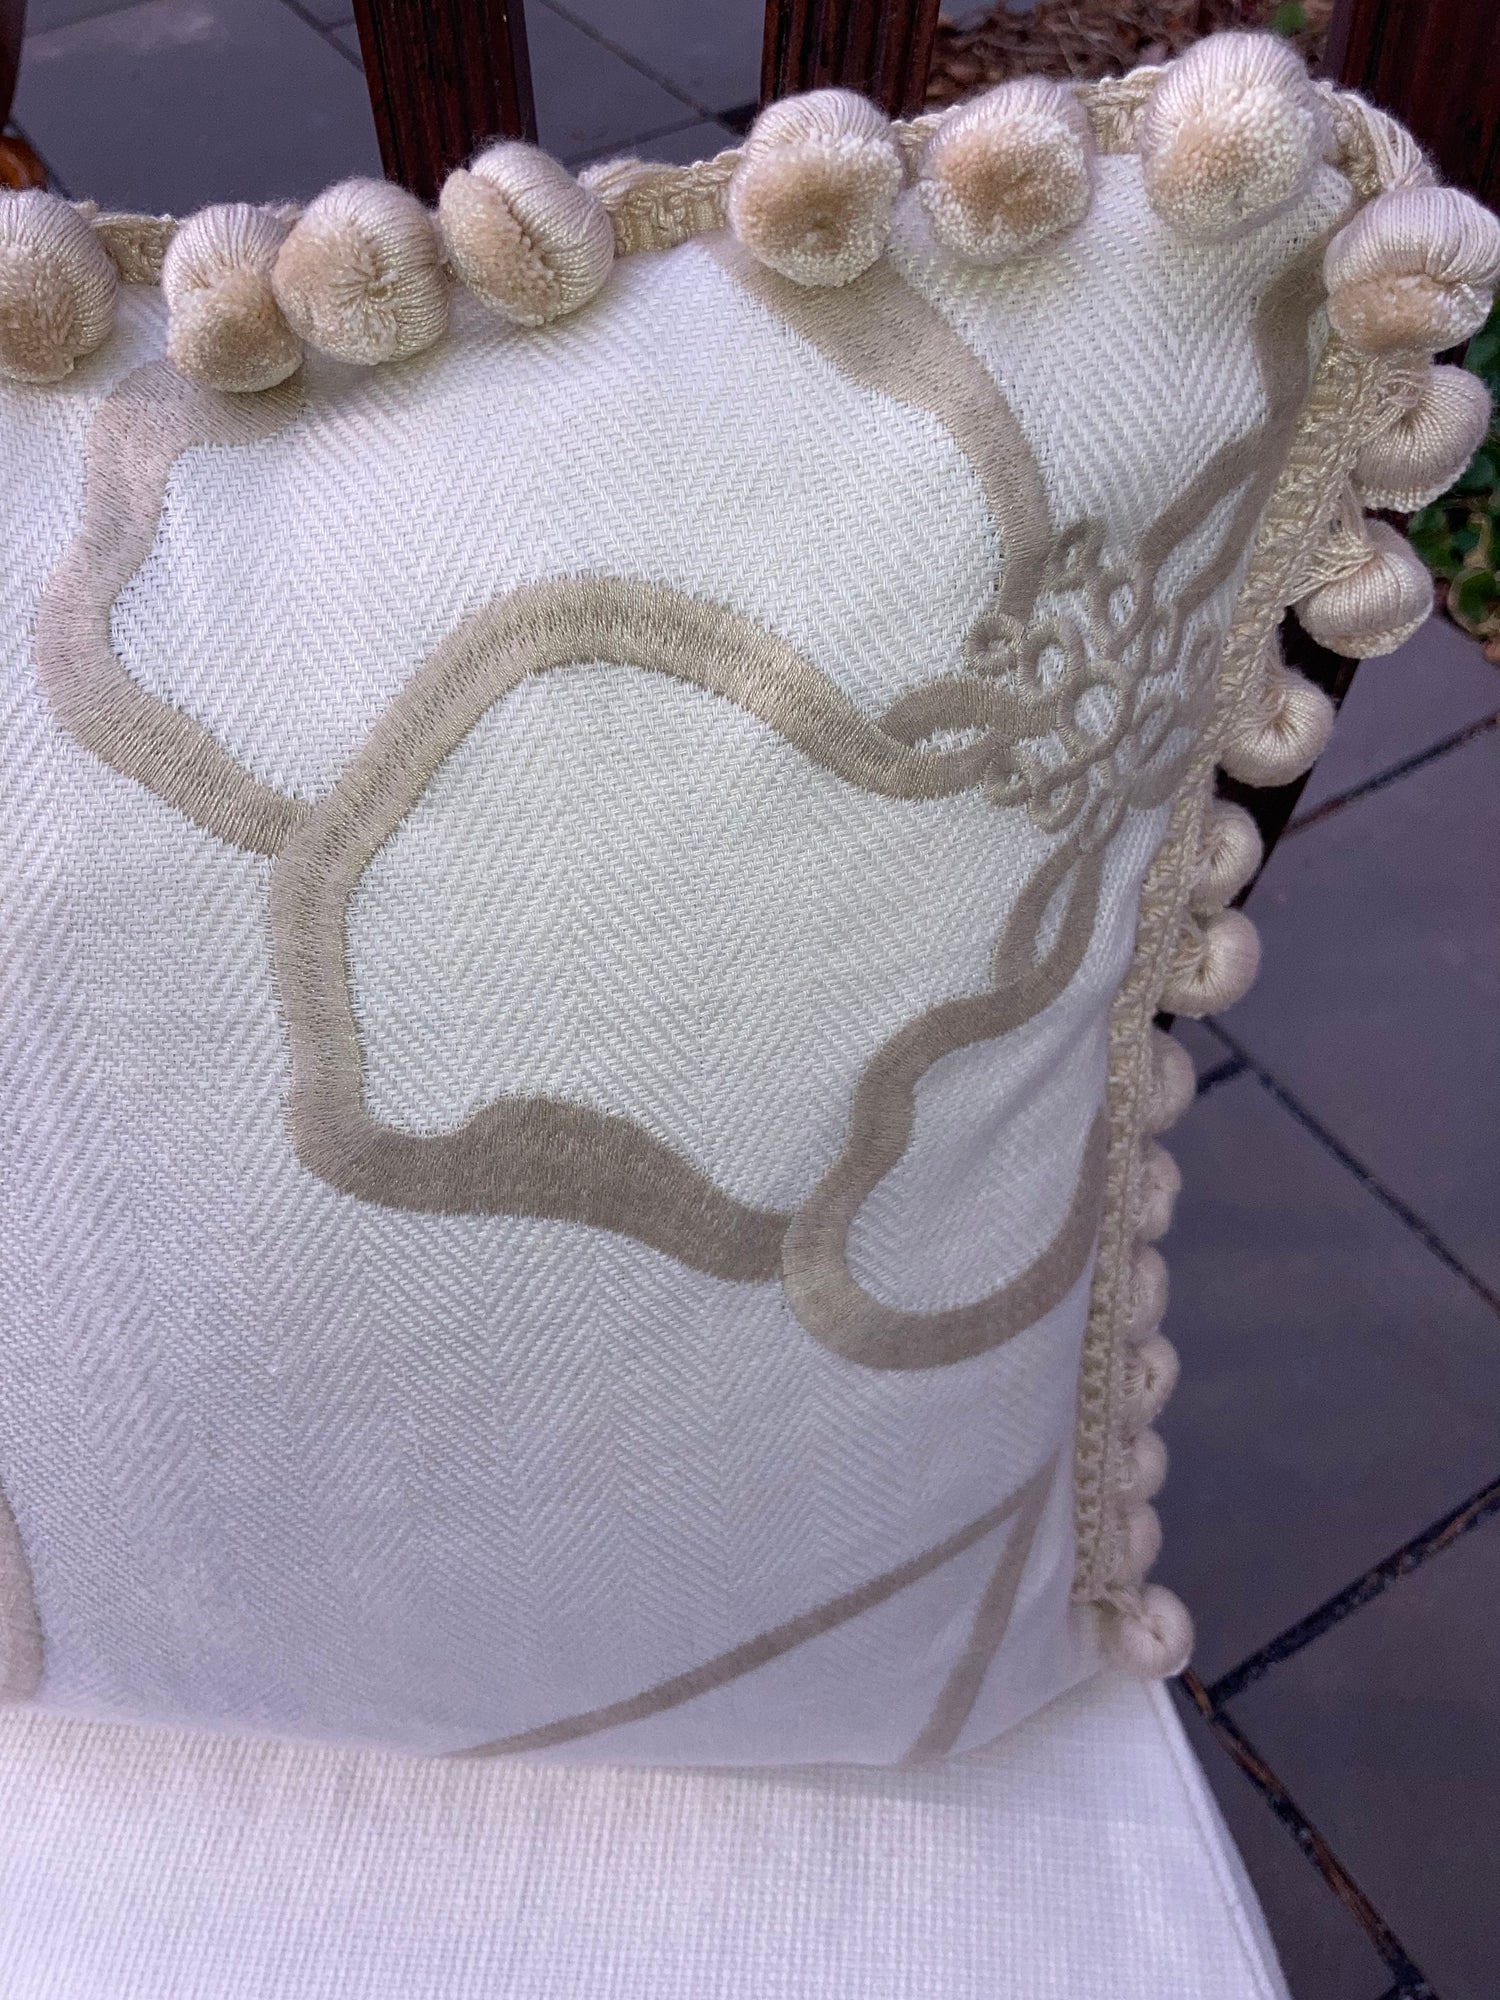 Flore Embroidered Contemporary Neutral 16 X 16 Square Designer Manuel Canovas Pillow Detail with Down Feather 